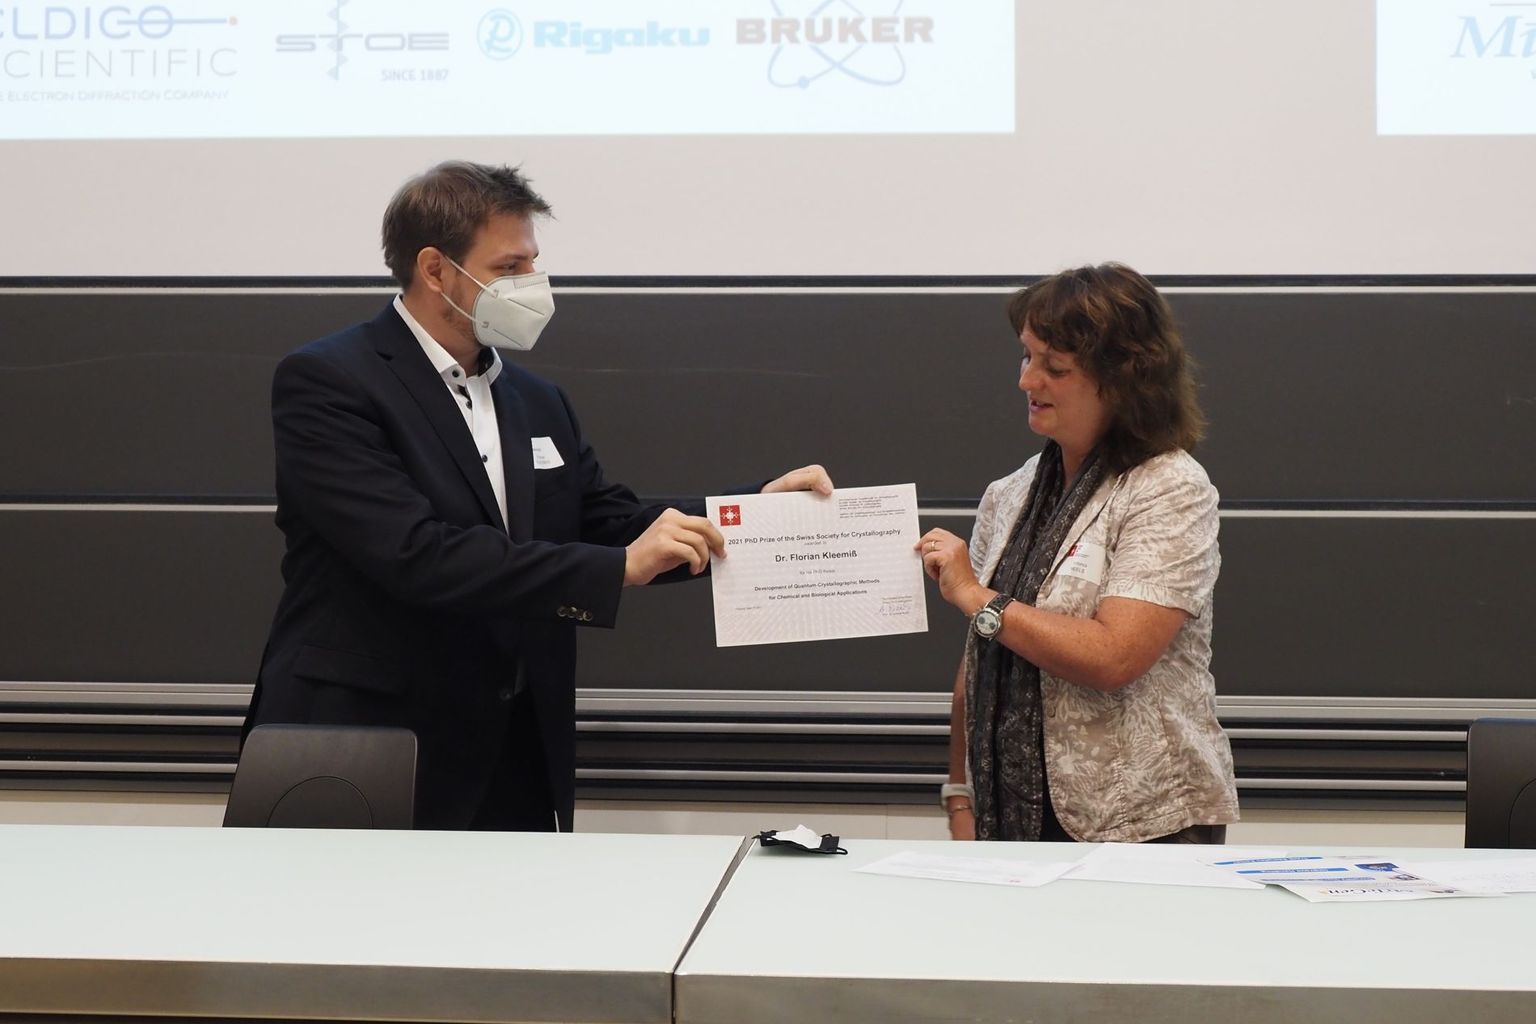 Antonia Neels was President of the Swiss Society for Crystallography (SGK) from 2018 to 2021. Image: ceremony and hand-over of the SGK doctoral award 2021 to Florian Kleemiss.